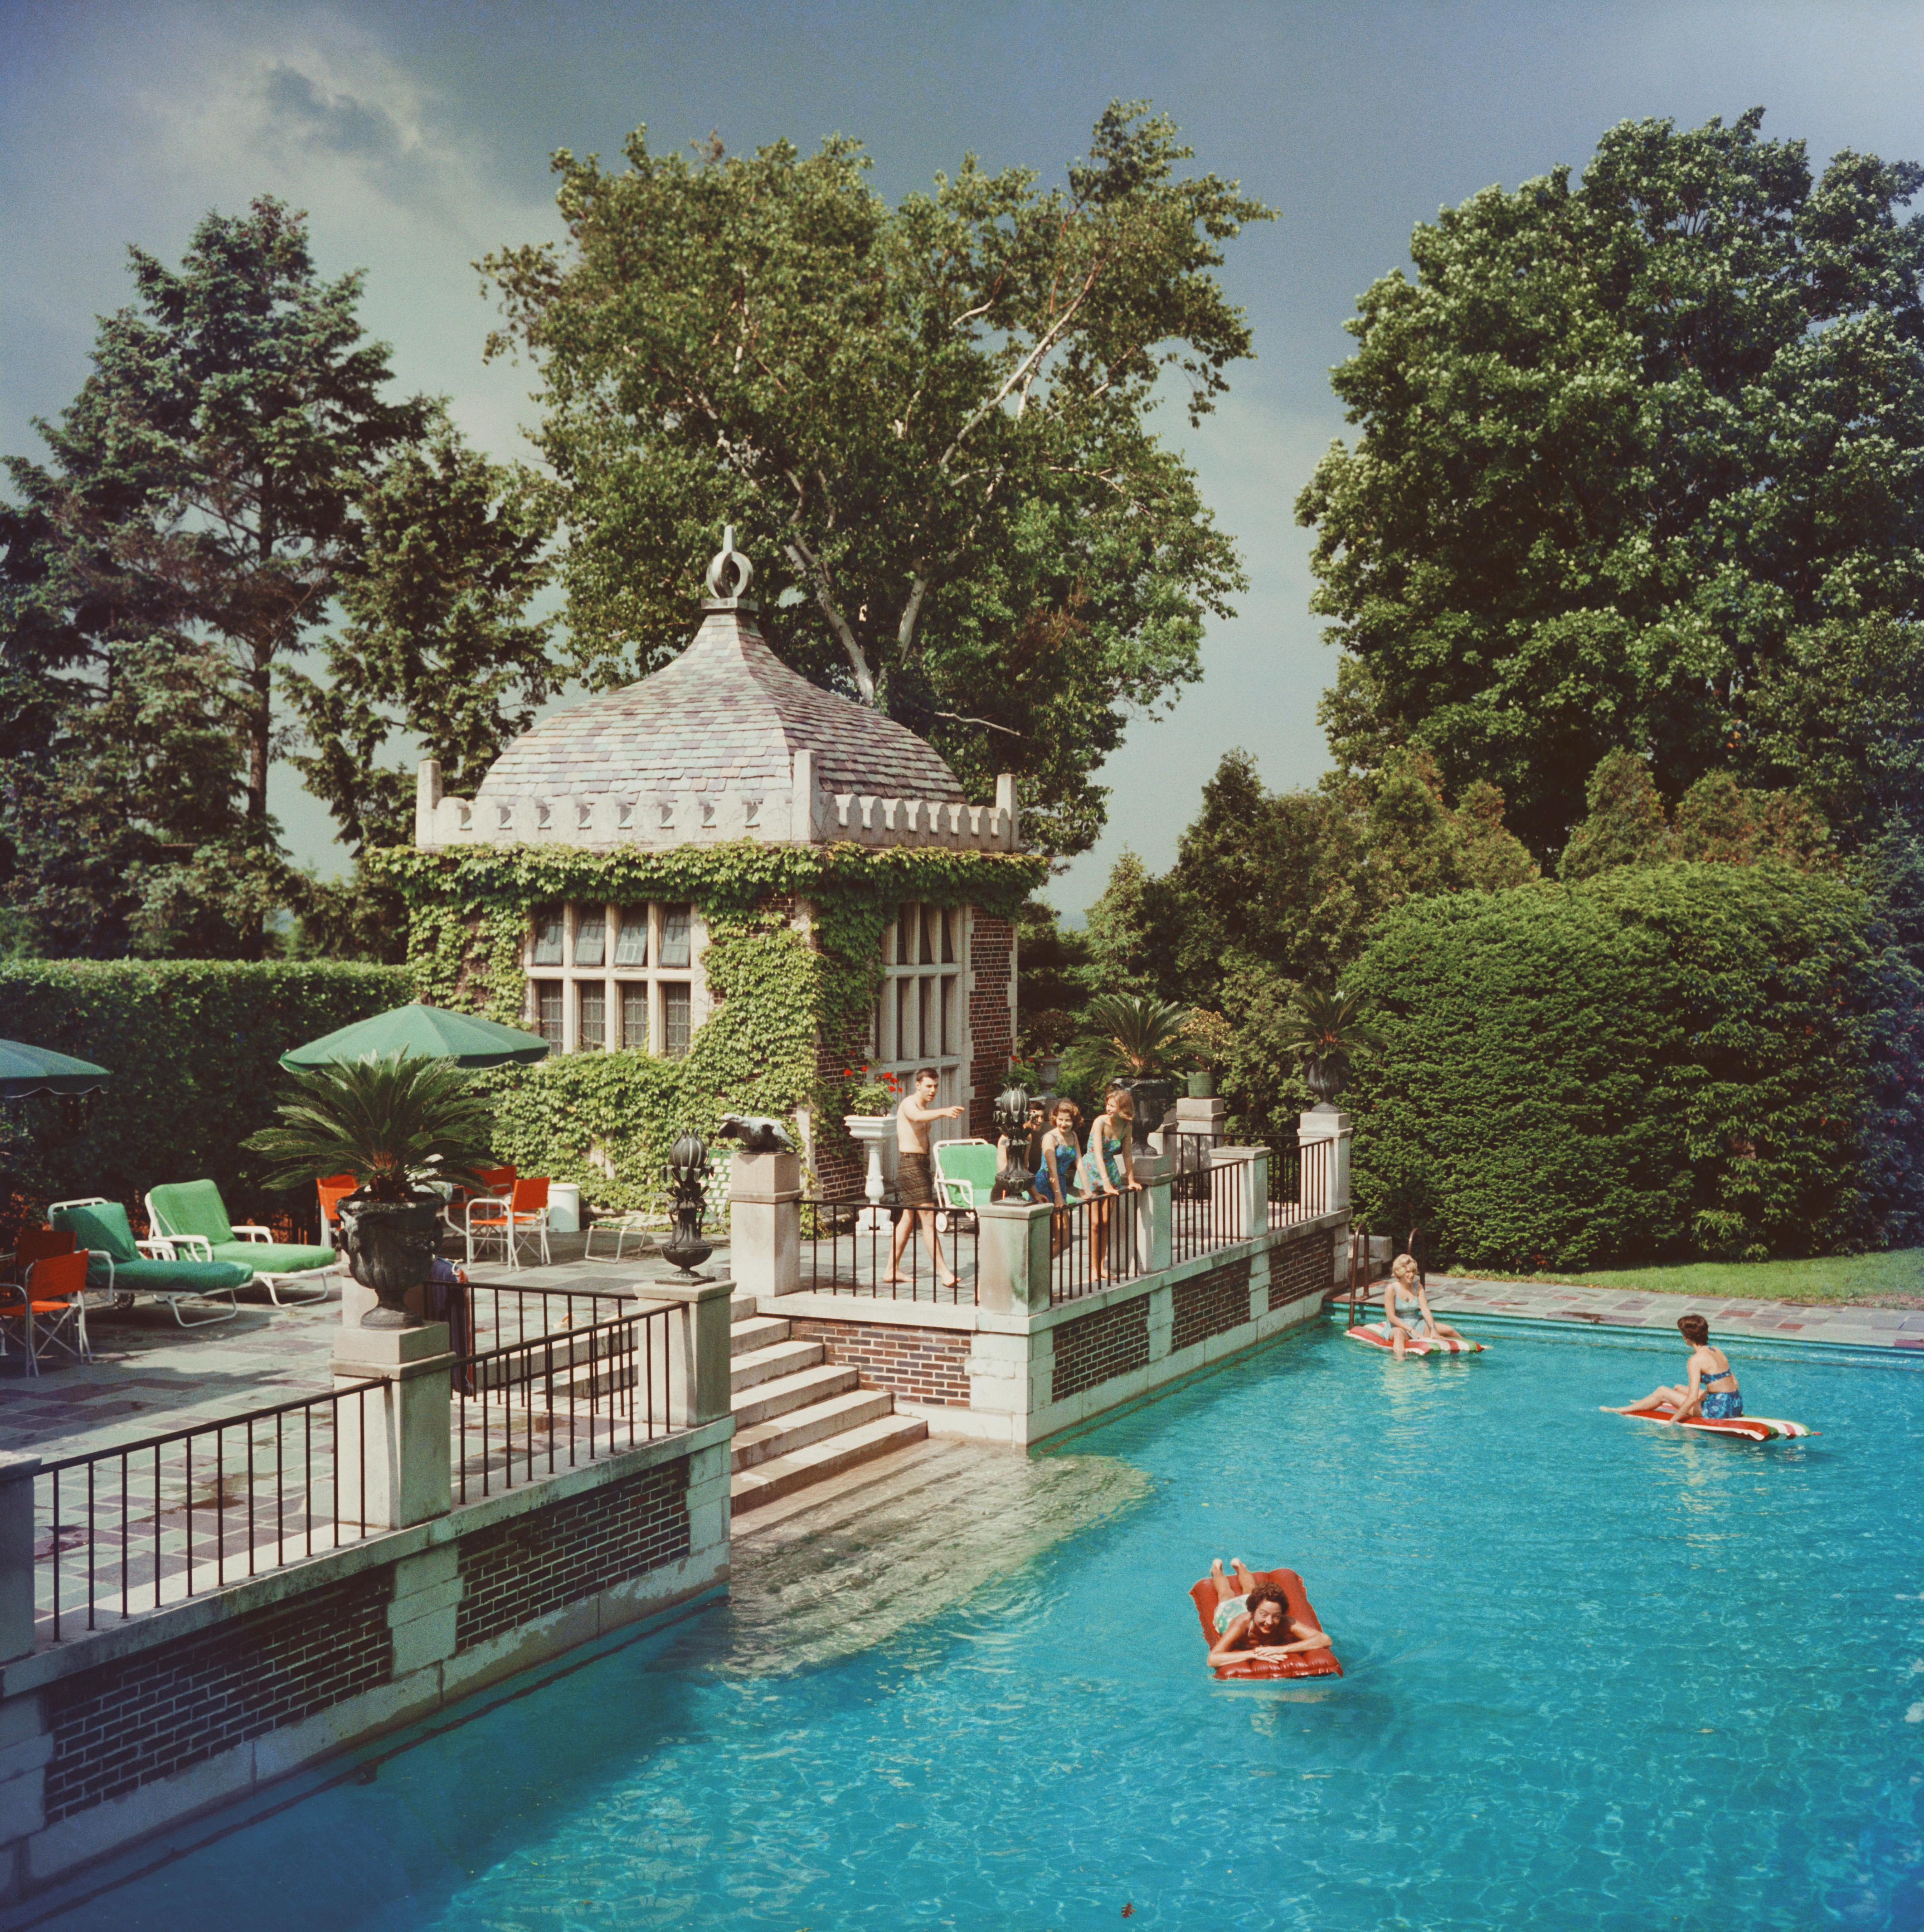 Slim Aarons
Family Pool, 1960
C print
Estate stamped and numbered edition of 150 
with Certificate of authenticity

circa 1960: Mrs A Watson Armour III (Jean Schweppe) with friends and family enjoying the pool on their estate at Lake Forest,